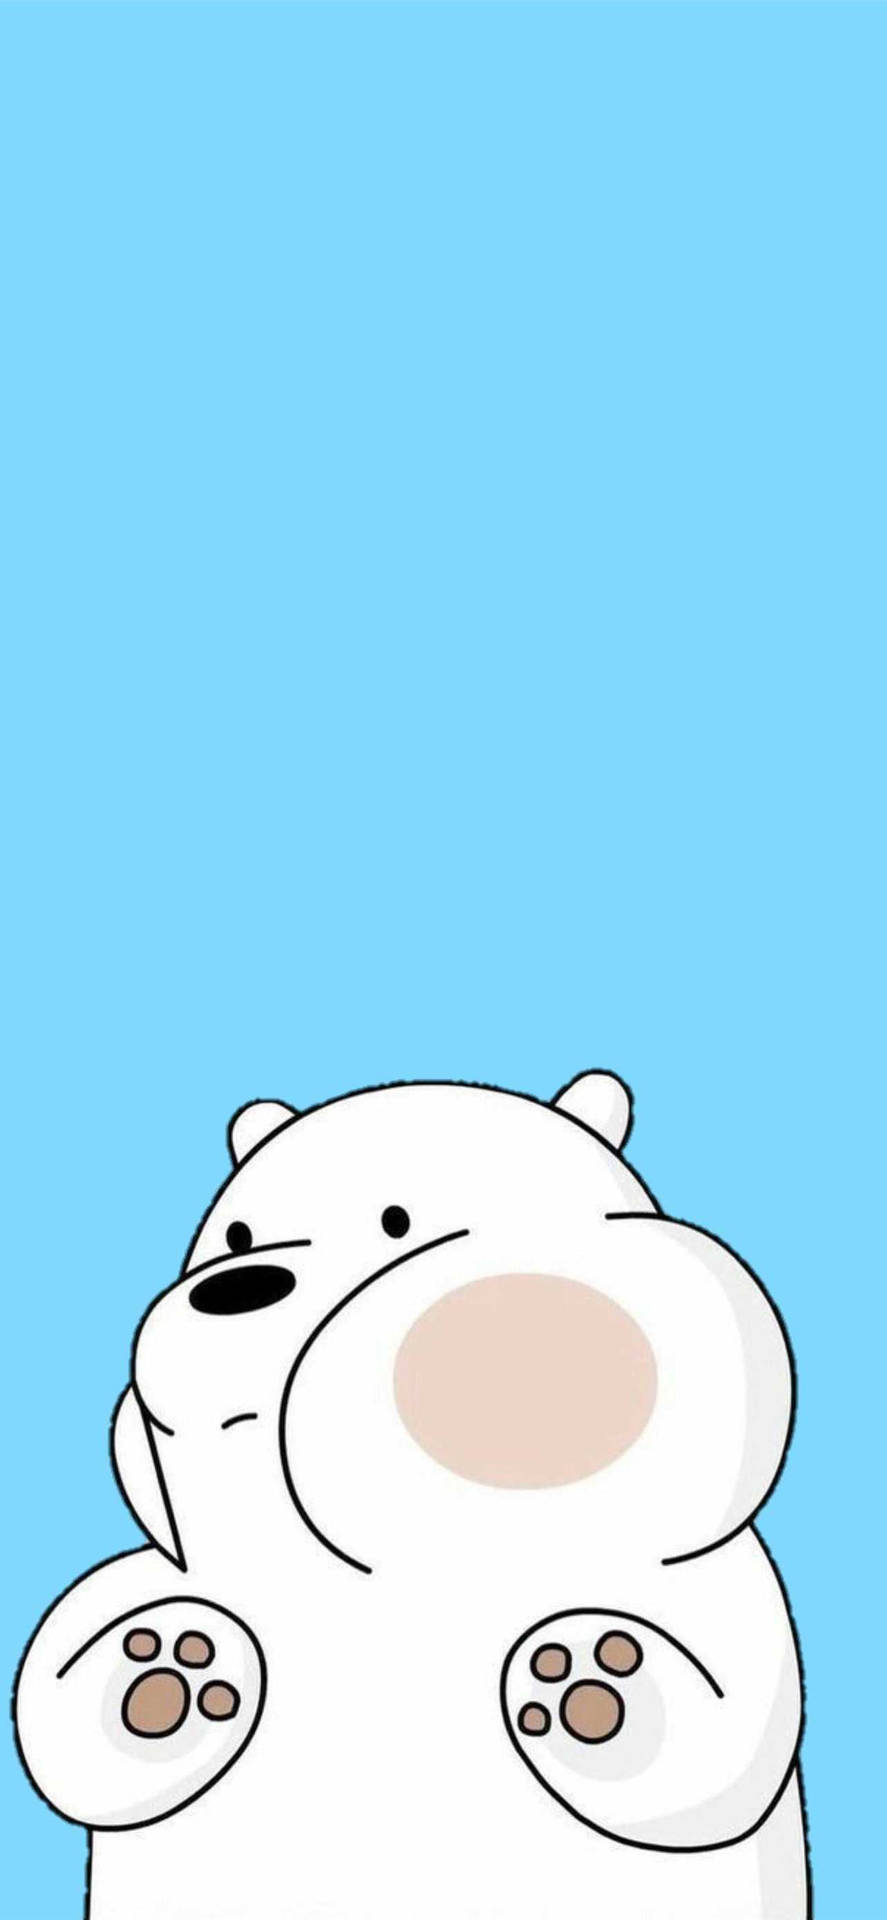 1284X2778 Cute Iphone Wallpaper and Background